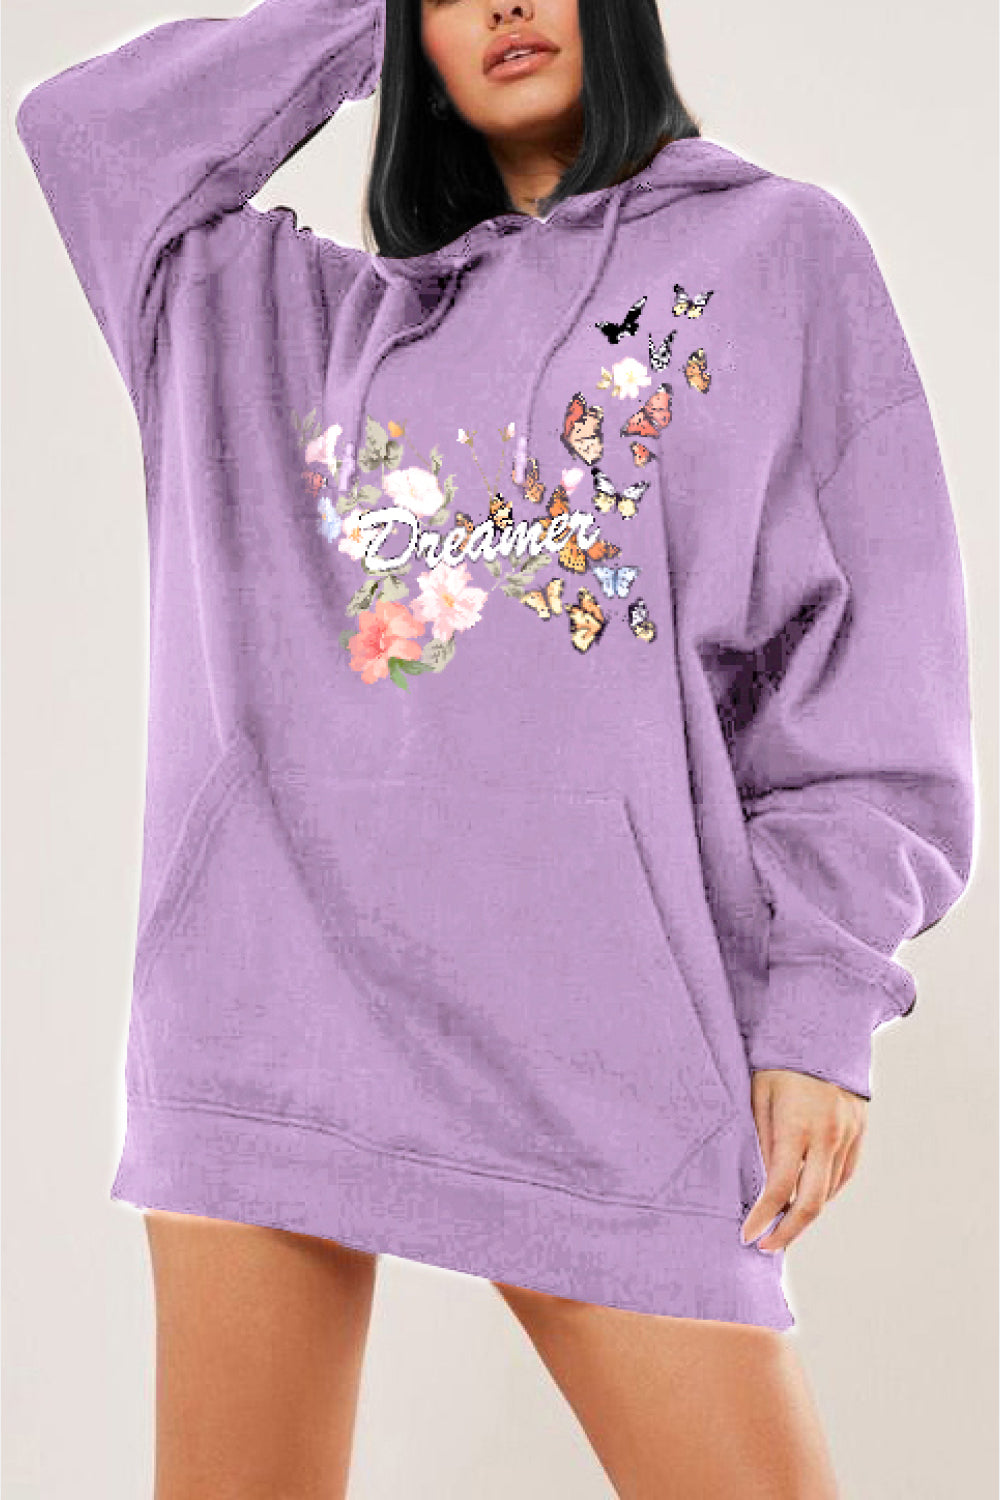 Simply Love Simply Love Full Size Dropped Shoulder DREAMER Graphic Hoodie